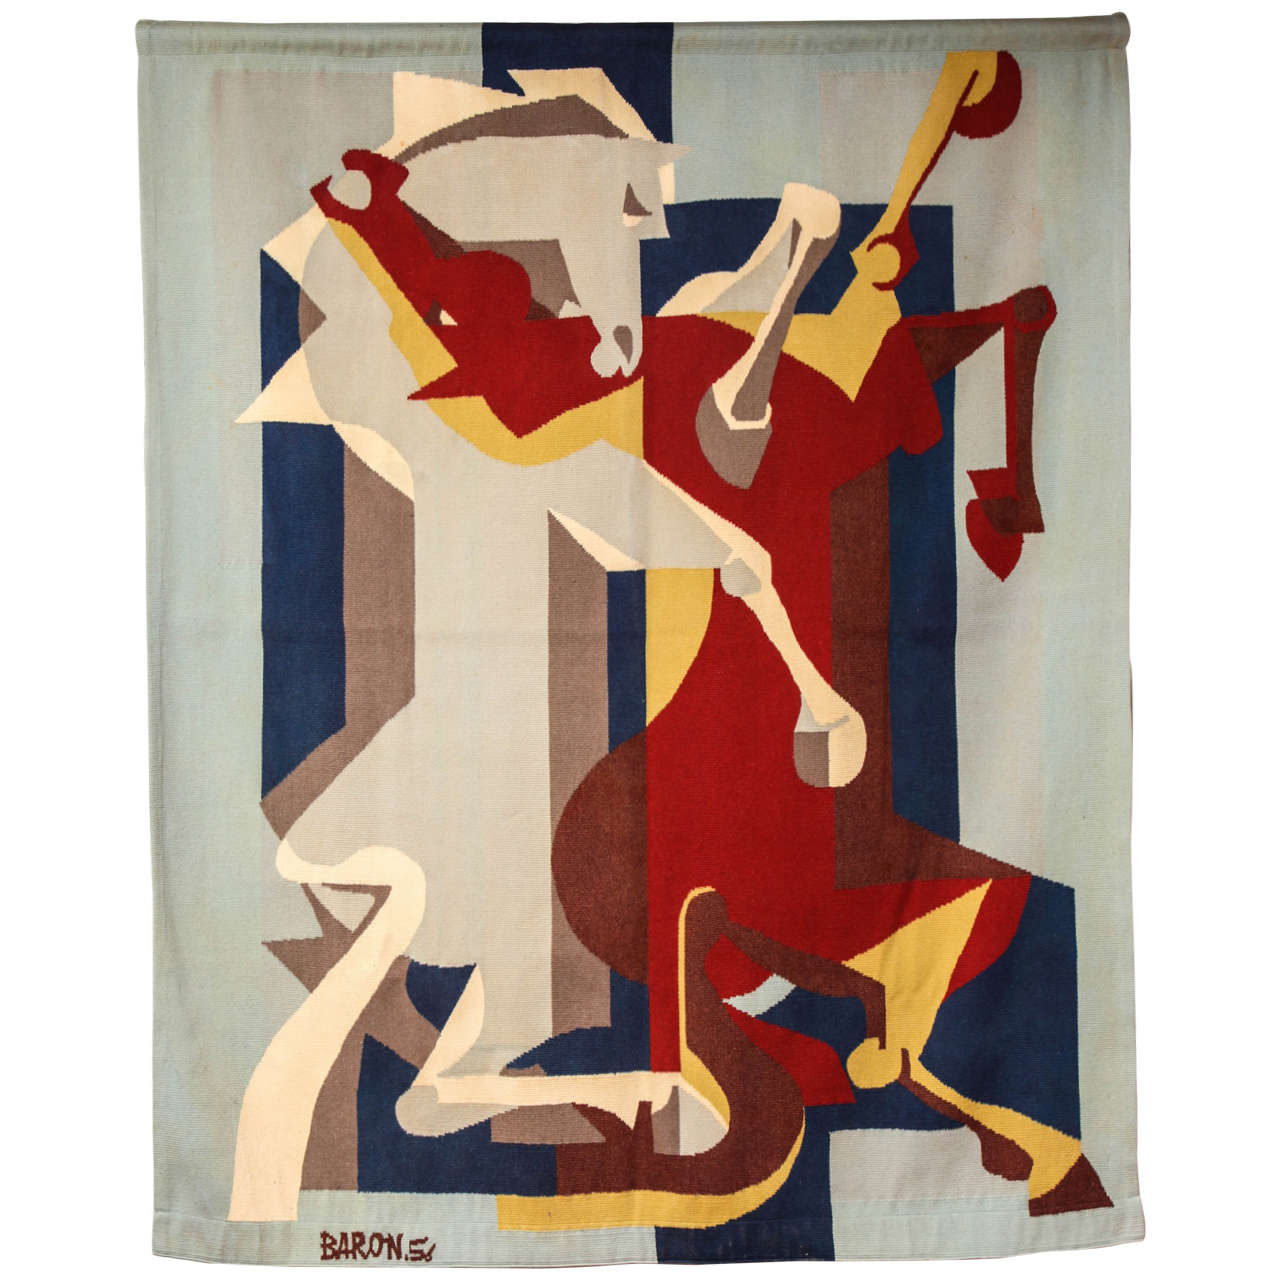 Jean Baron 1956 French Wool Hand Woven Tapestry "Peles de Cabalos" For Sale